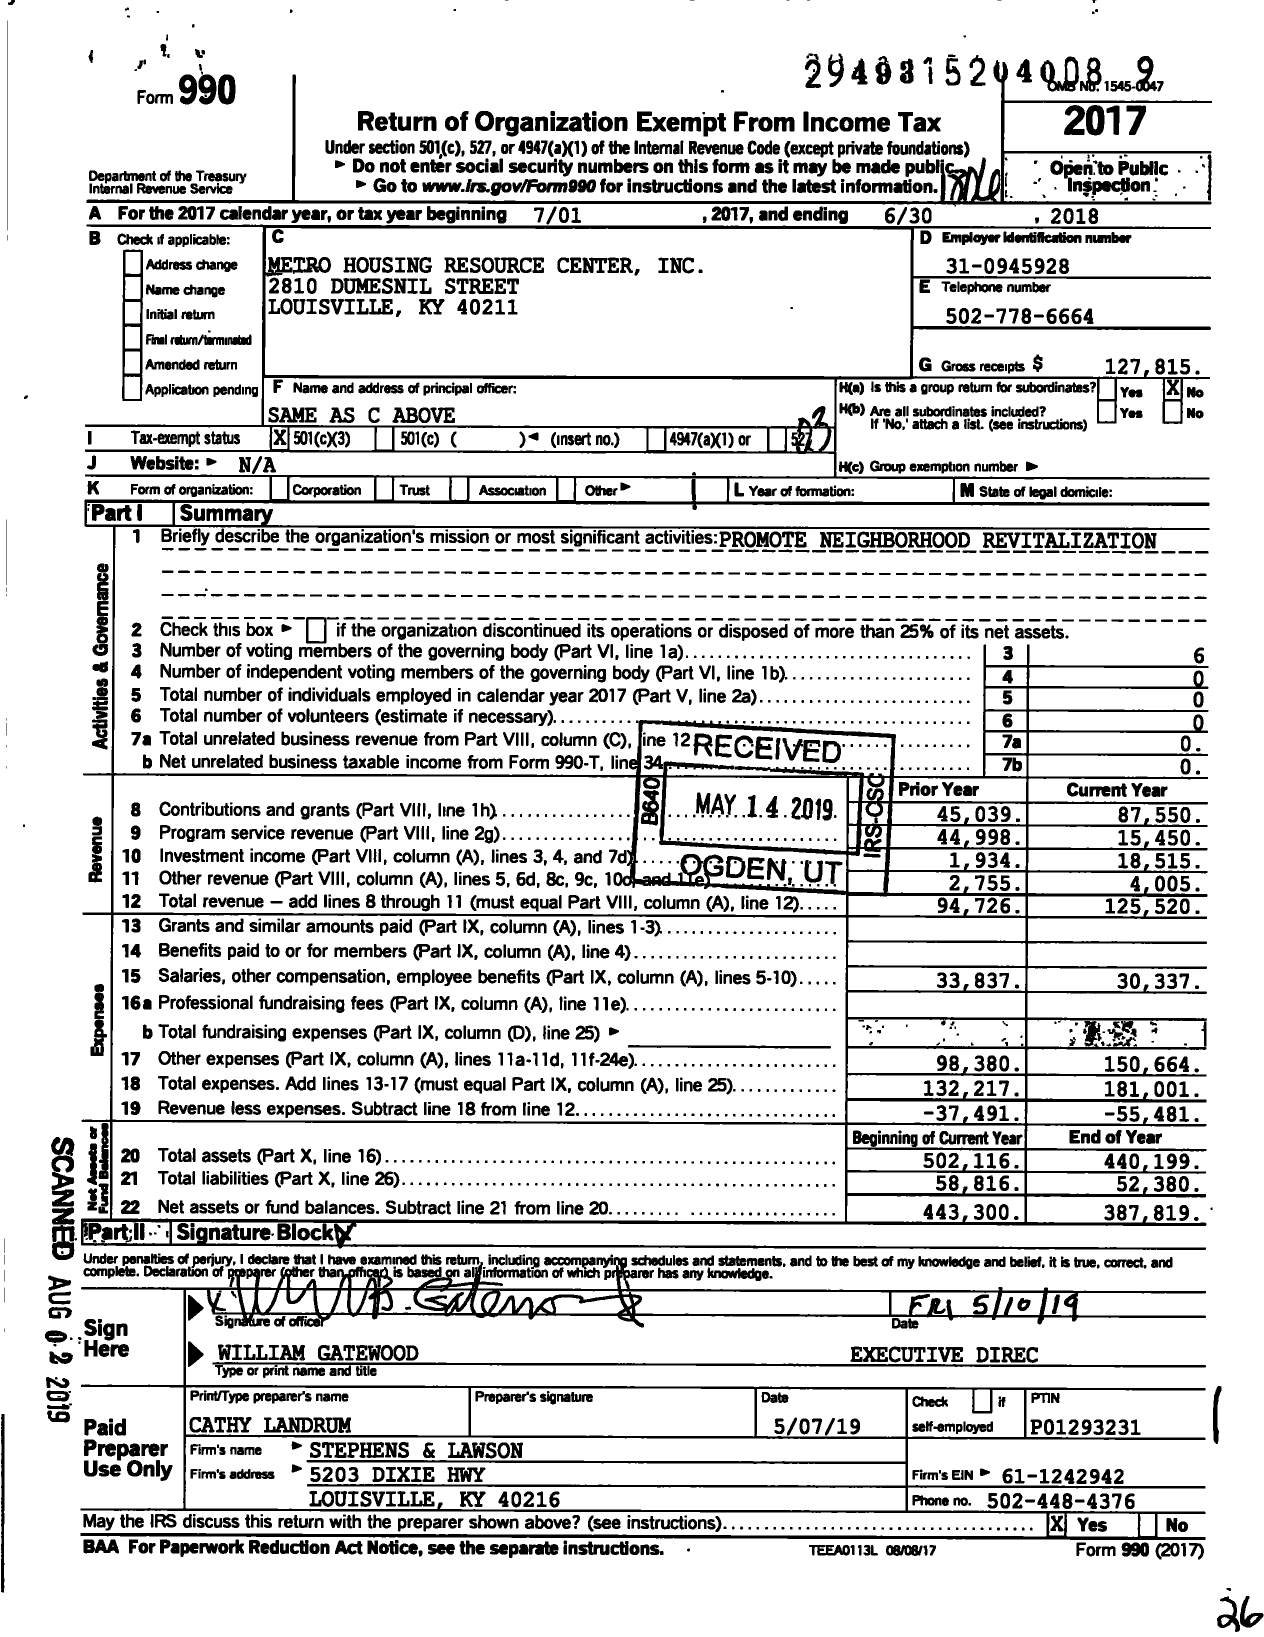 Image of first page of 2017 Form 990 for Metro Housing Resource Center